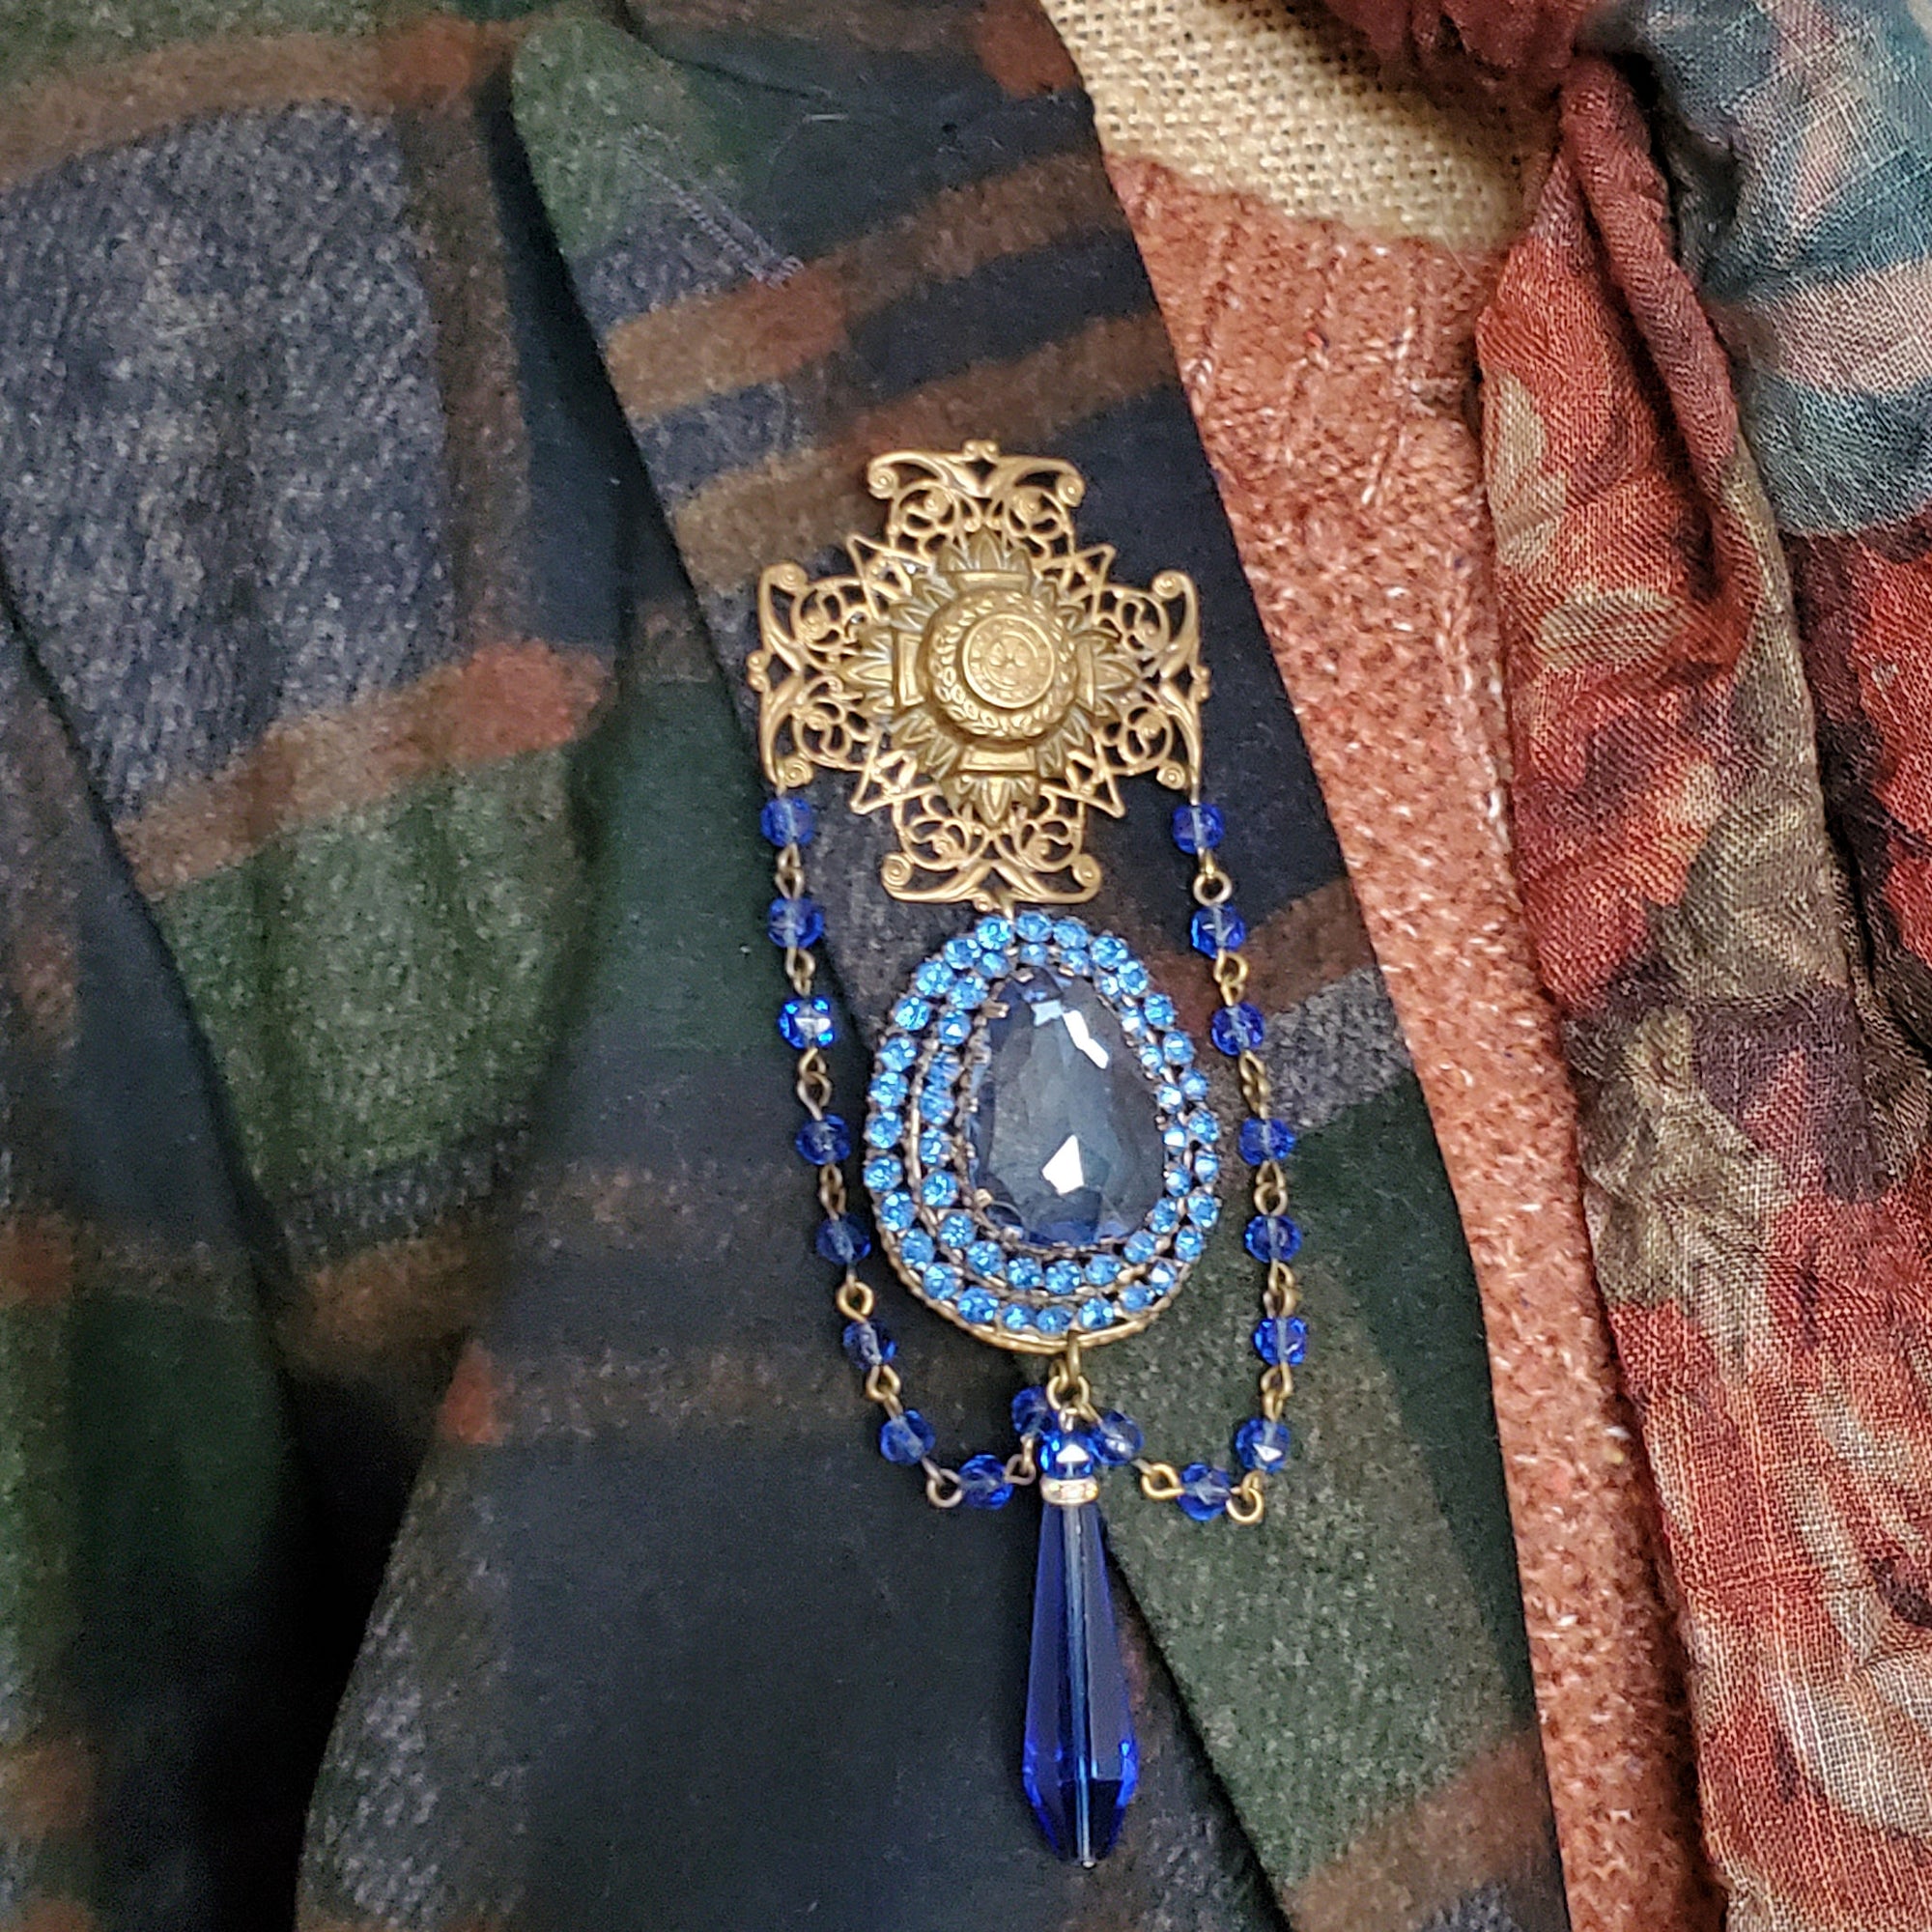 Victorian Style Brooch with an Antique Brass Filigree Maltese Cross, with a genuine military pin center. A vintage large blue crystal dress clip is the statement centerpiece. Two strands of antique blue glass beads and a 1920s faceted teardrop blue bead finish this brooch.